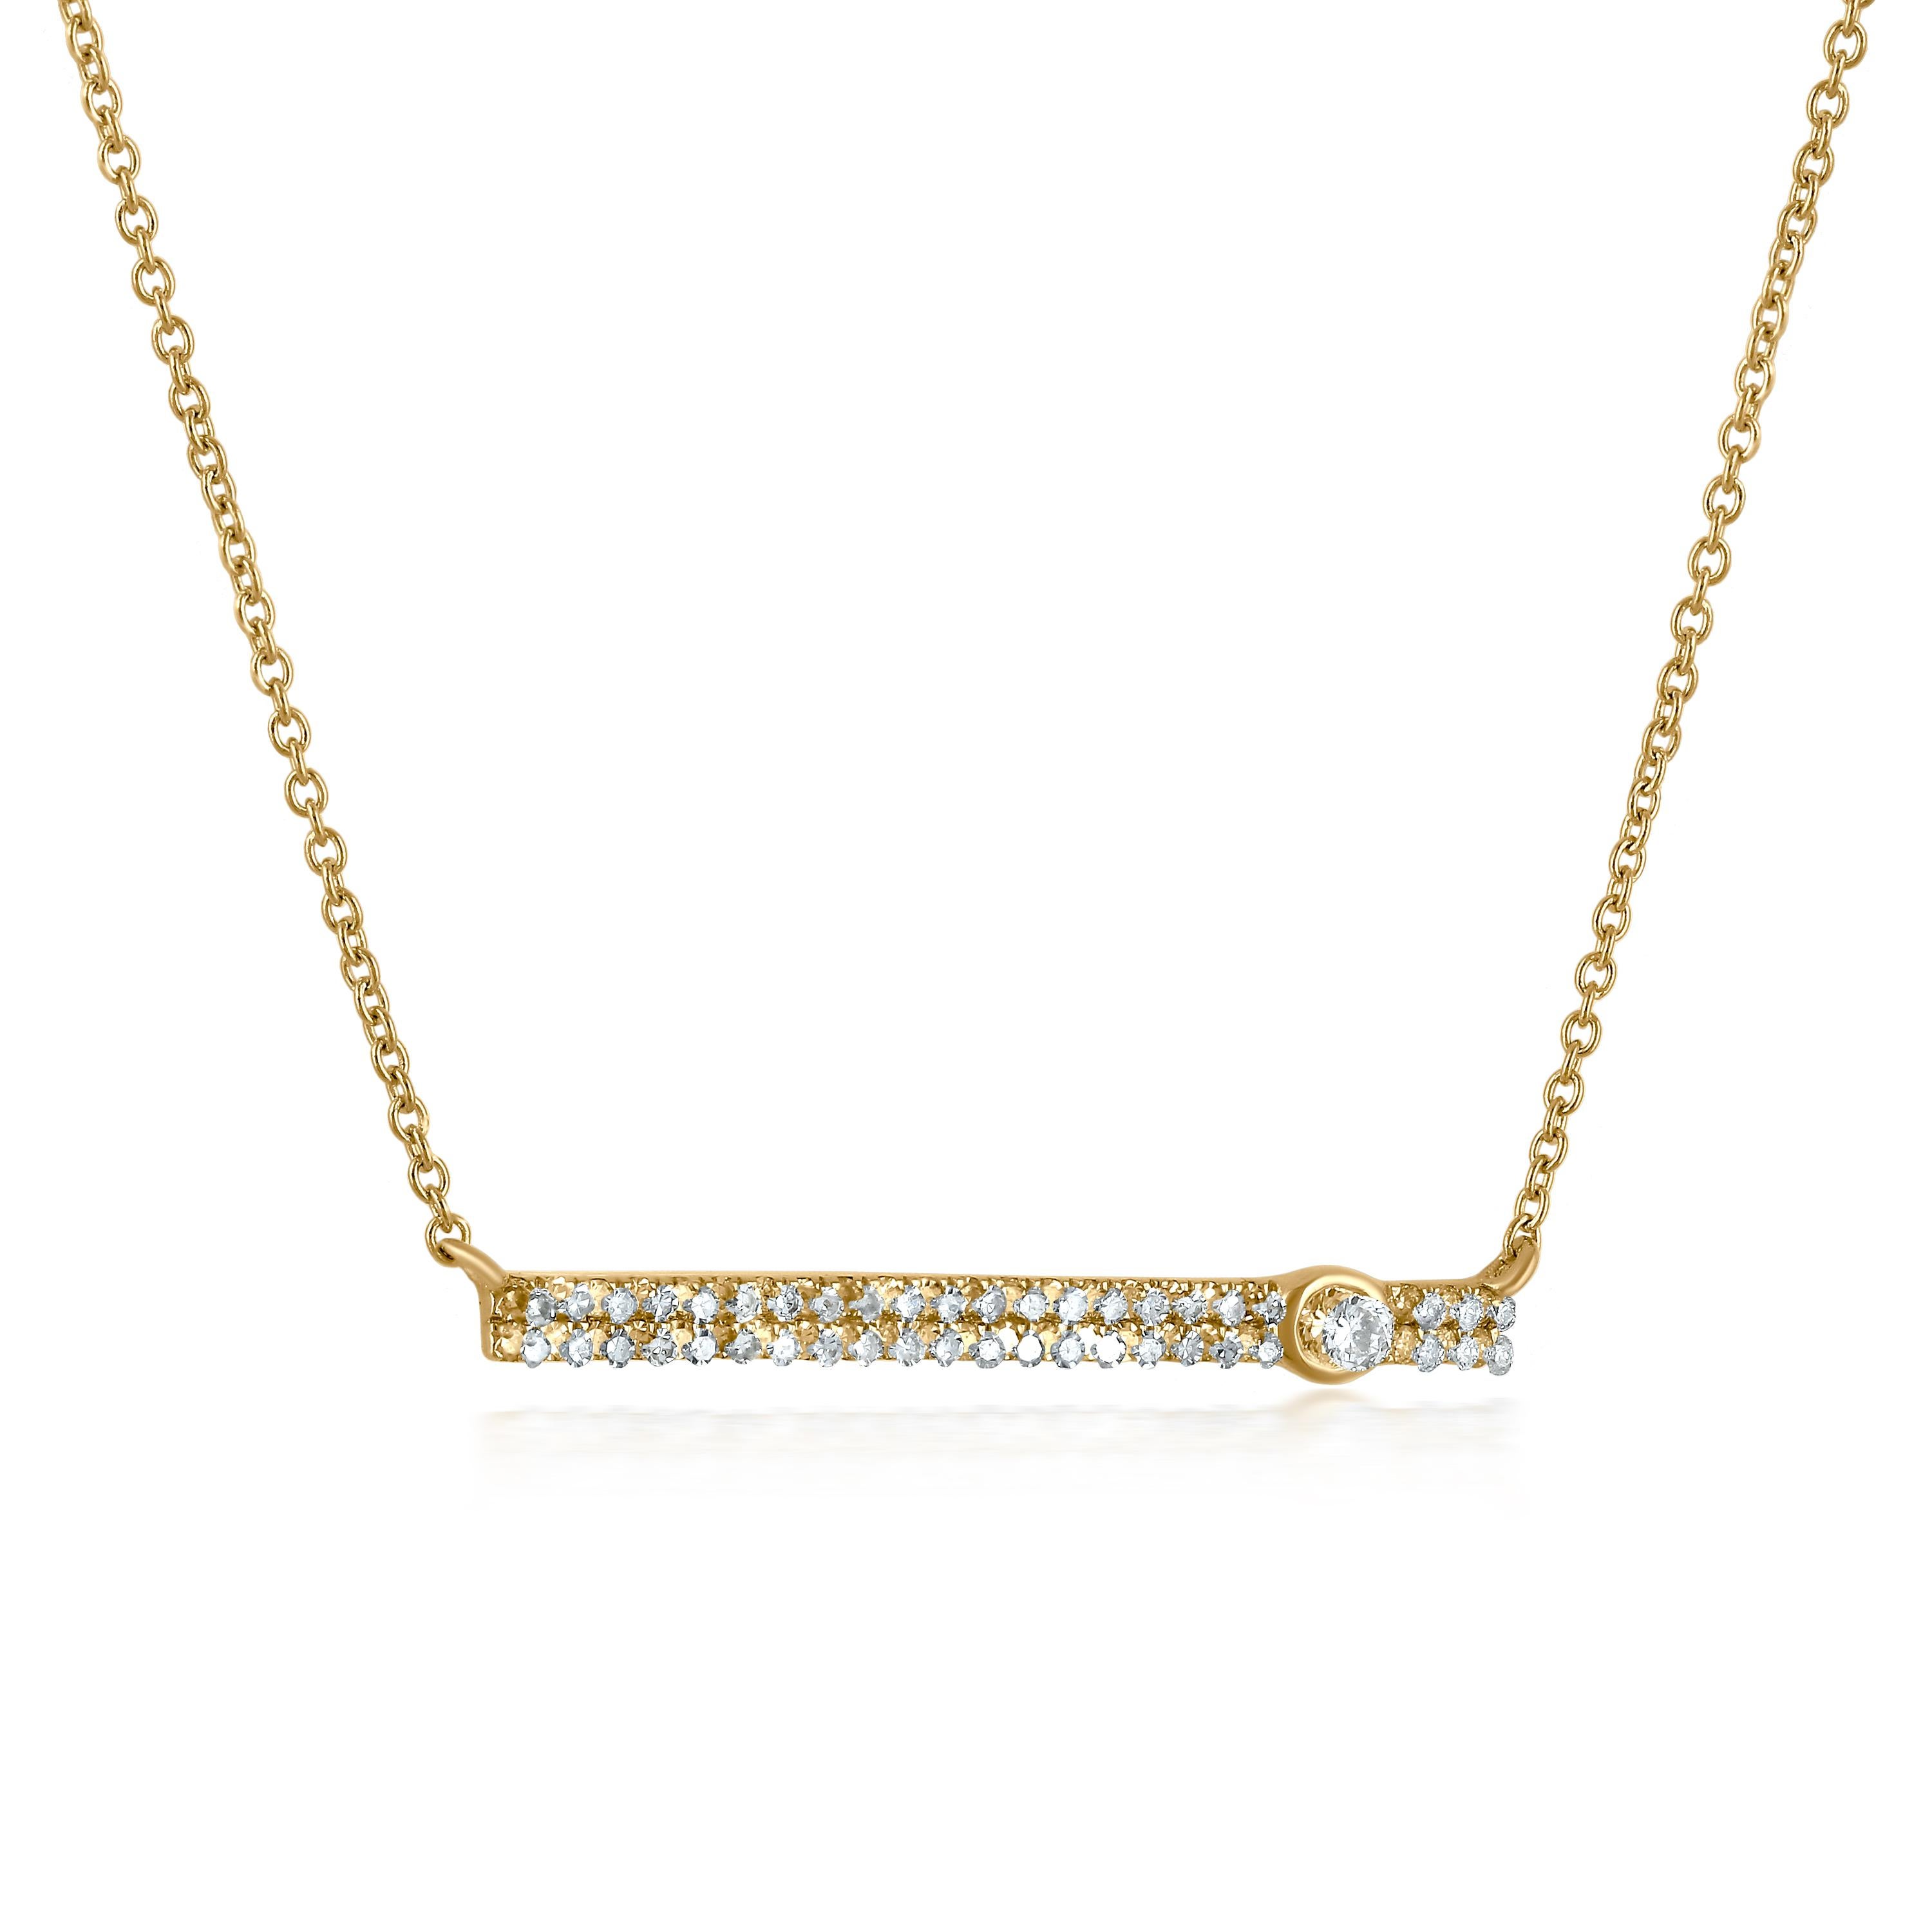 A rectangle bar pendant has two rows of beautifully set 0.21 carat round full-cut and single-cut diamonds. At one end of the bar, a round diamond is bezel set, adding depth to the necklace. This necklace, which hangs from a gold chain, became made